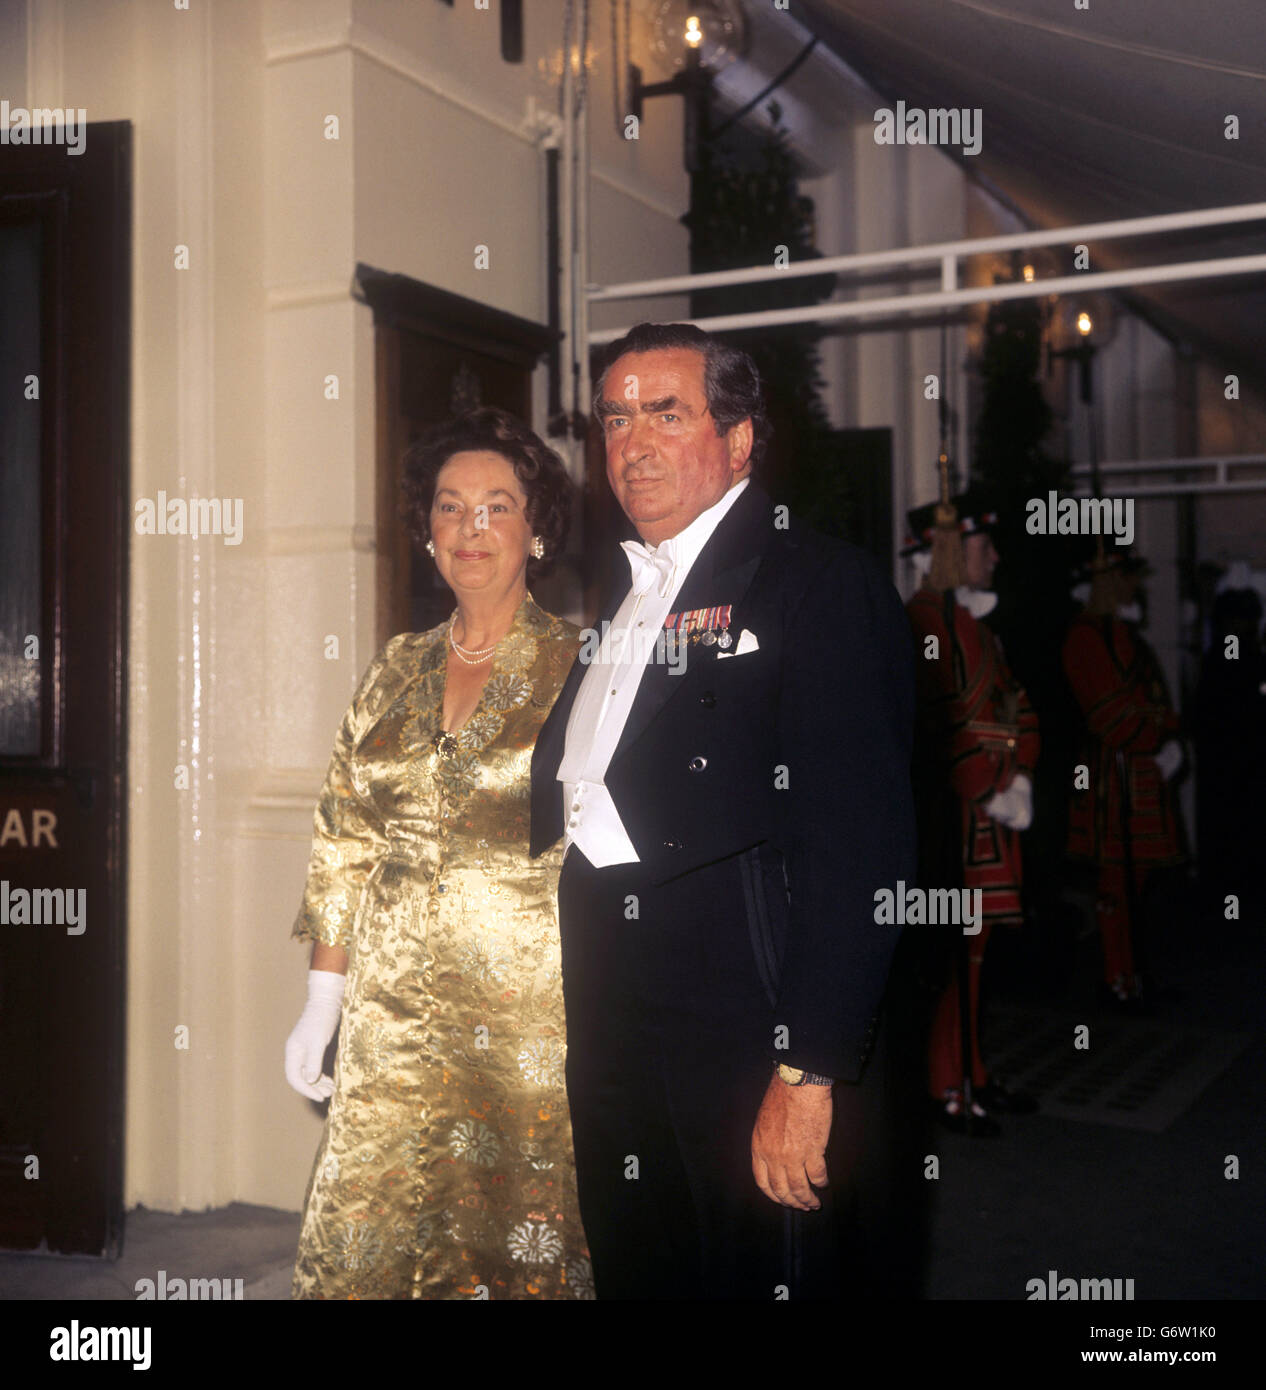 Chancellor of the Exchequer, Denis Healey, with his wife Edna on arrival at the Royal Opera House, Covent Garden, when they attended the Gala Silver Jubilee performance of opera and ballet. Stock Photo